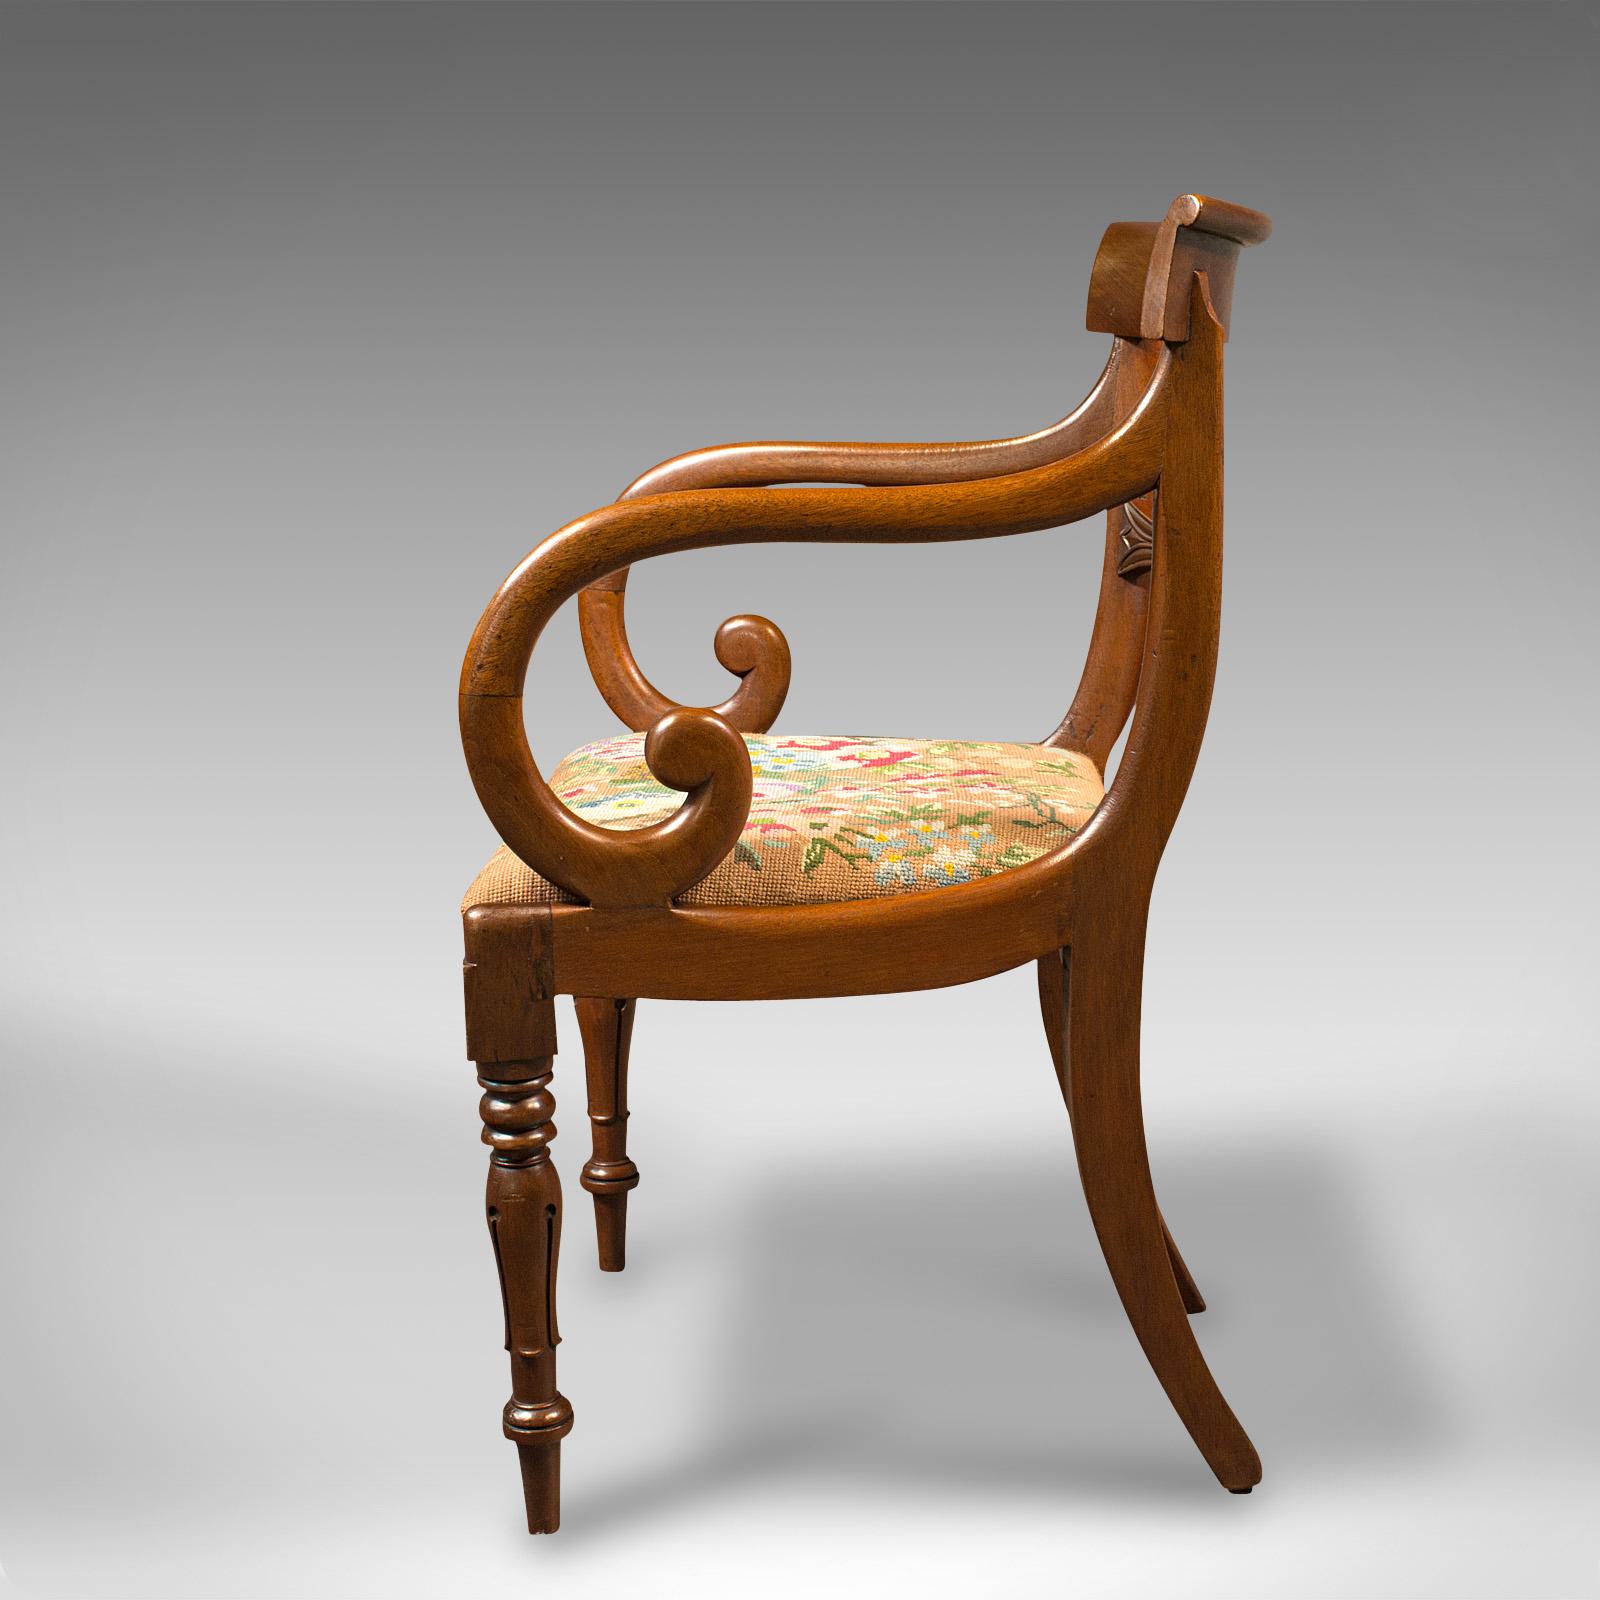 Antique Scroll Arm Chair, English, Armchair, Desk, Needlepoint, Regency, C.1830 In Good Condition For Sale In Hele, Devon, GB